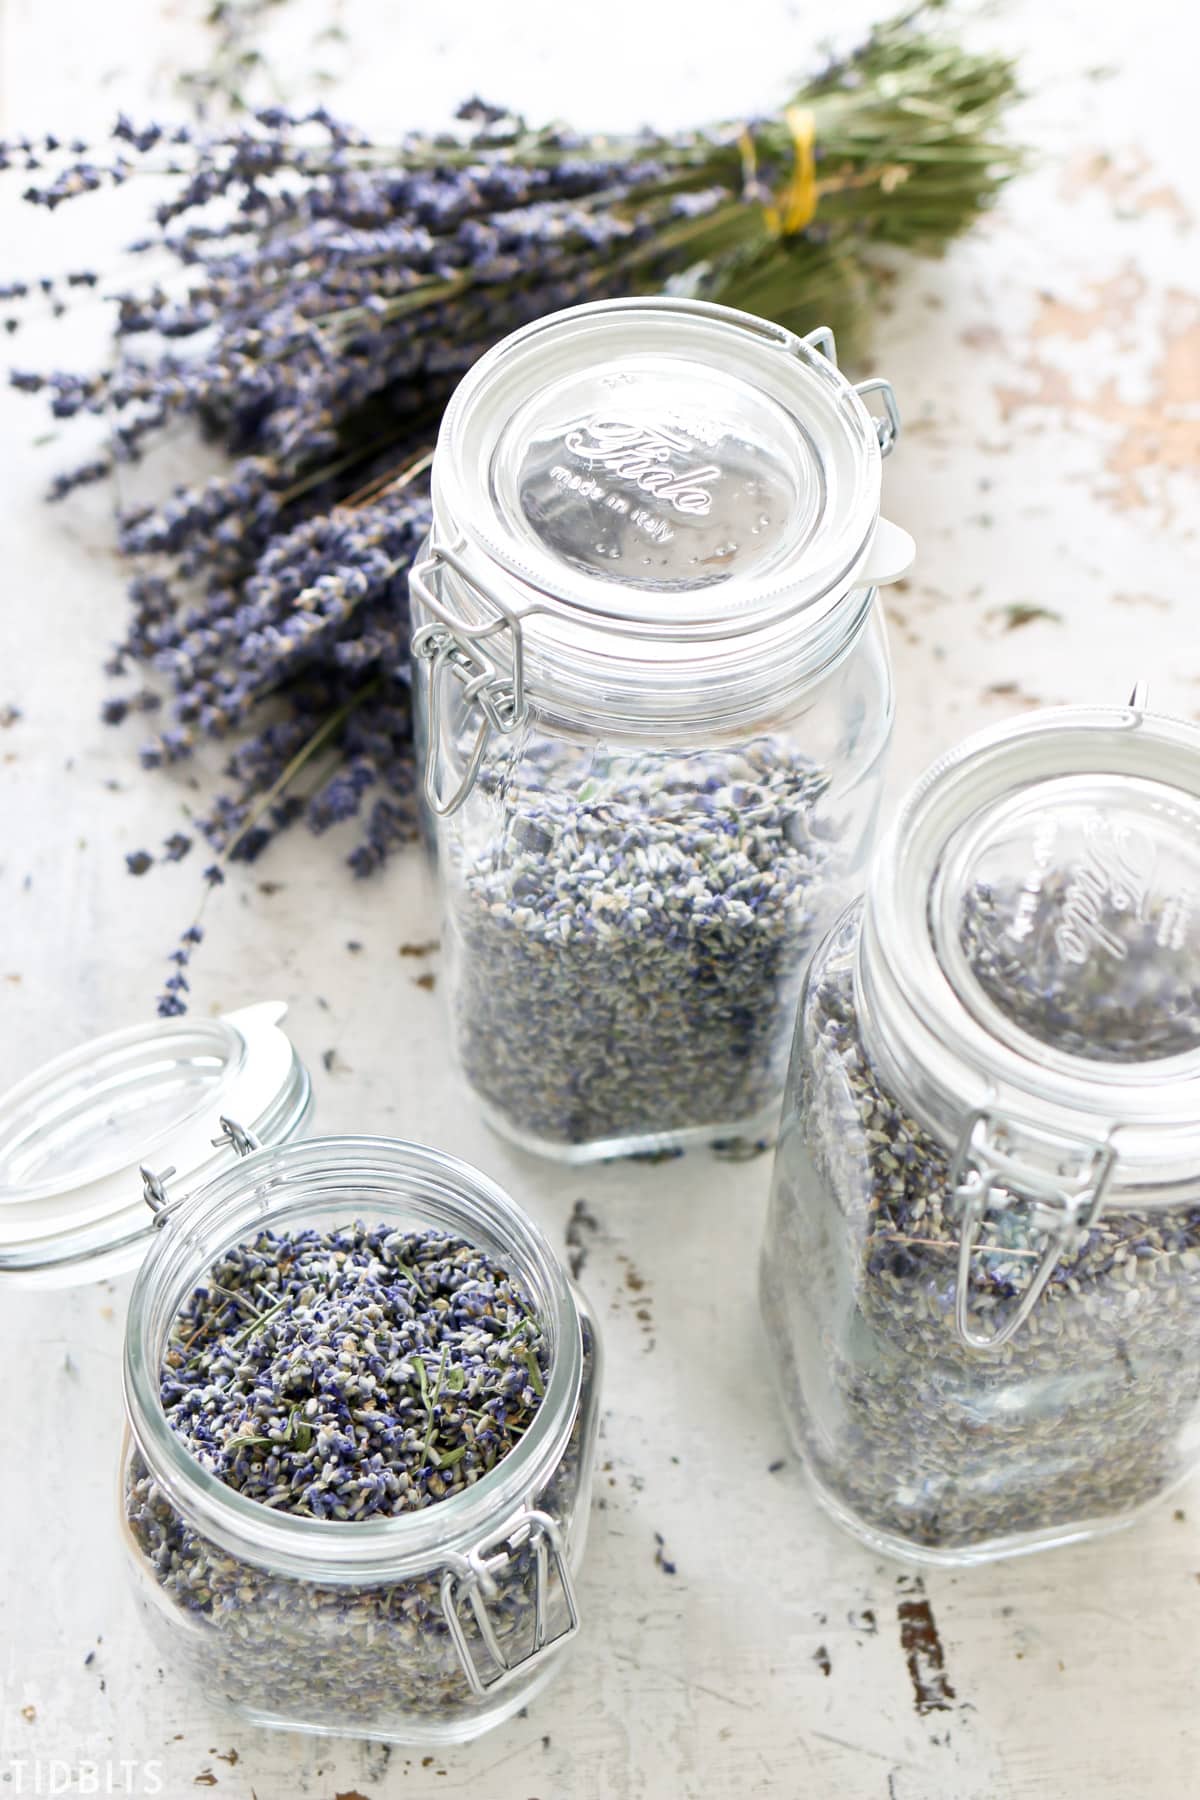 dried lavender buds in glass jars